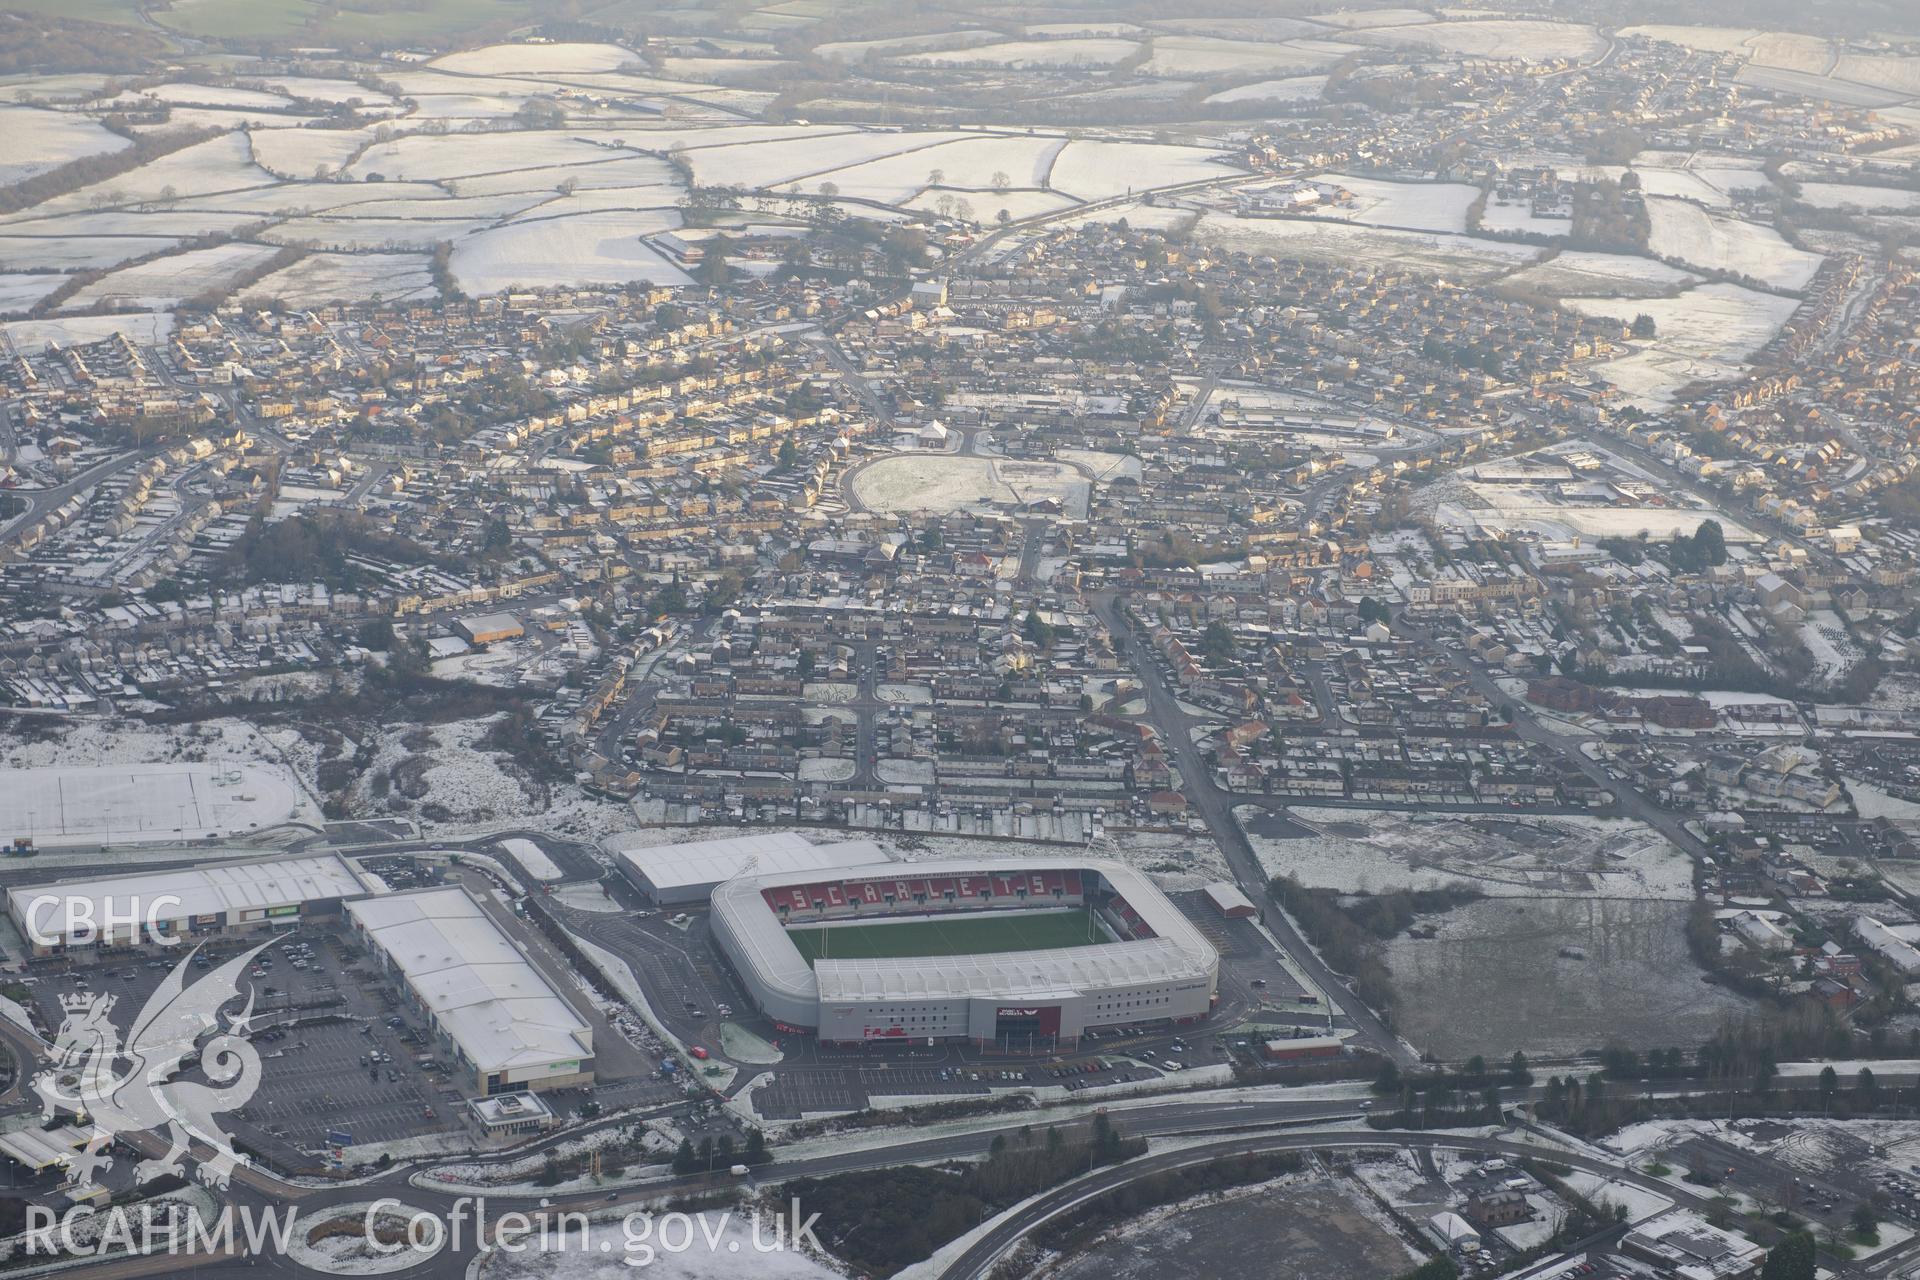 Parc-y-Scarlets stadium, Llanelli. Oblique aerial photograph taken during the Royal Commission?s programme of archaeological aerial reconnaissance by Toby Driver on 24th January 2013.